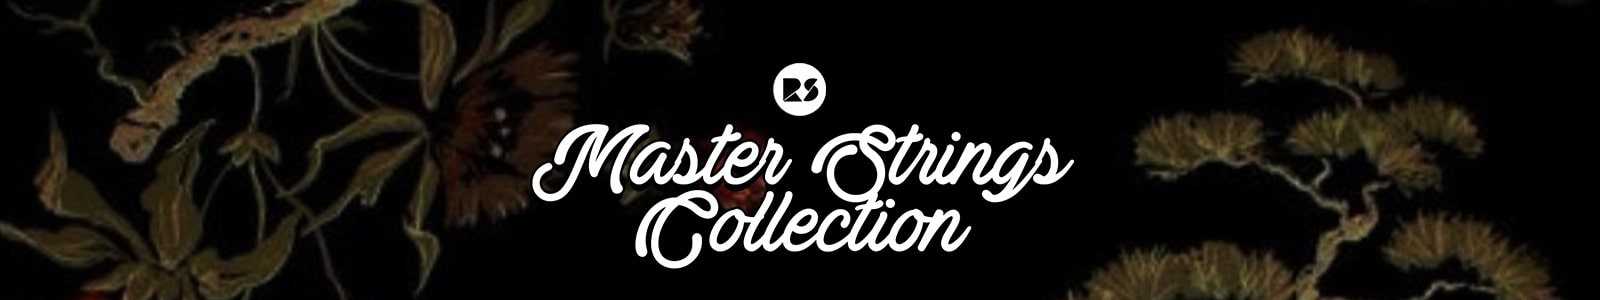 Master Strings Collection by Rast Sound